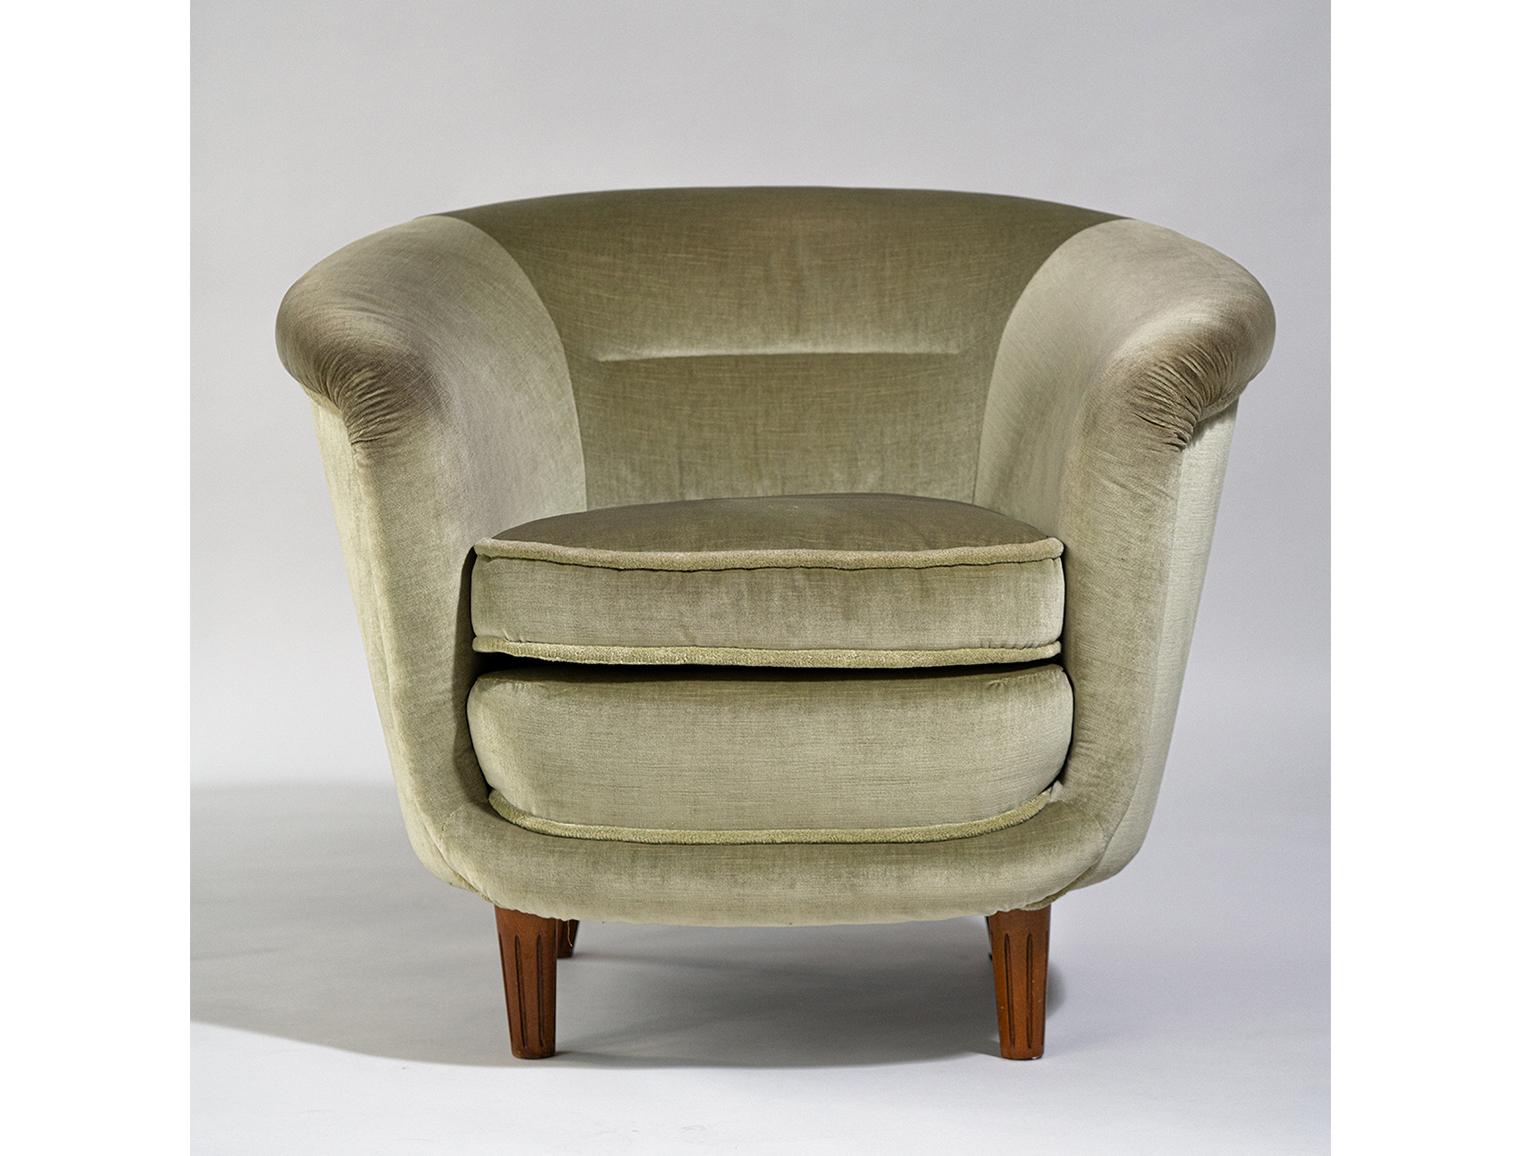 Mid-Century Modern Club Lounge Chairs from the 1930/40s with Original Mohair Fabric, Detailed Legs